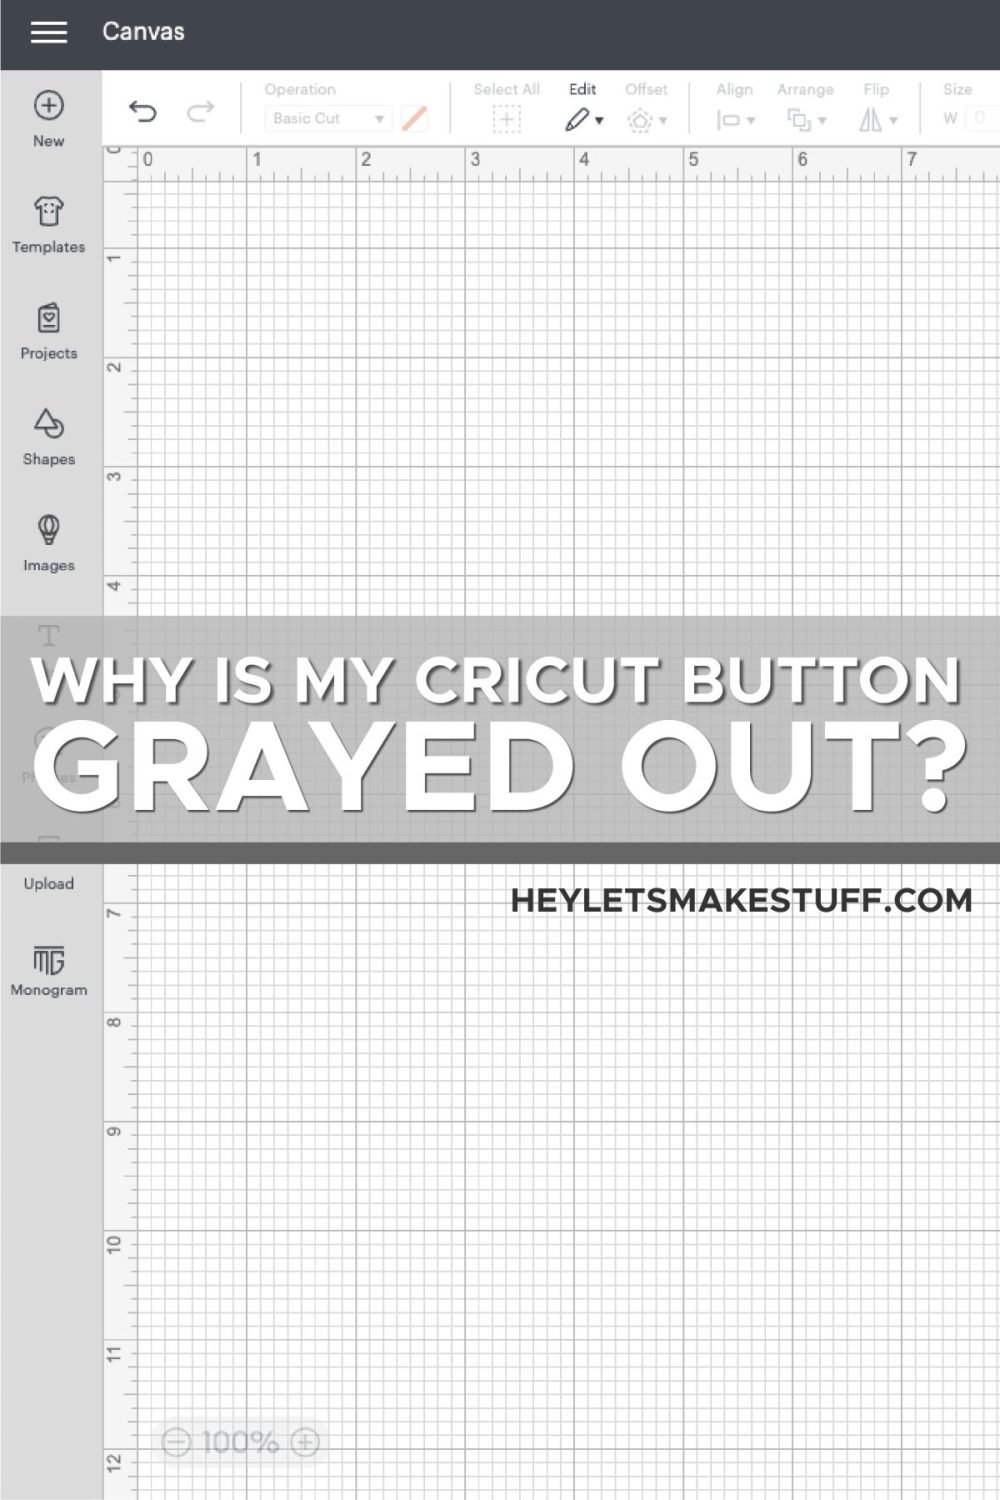 Why is My Cricut Button Grayed Out on Cricut Canvas in gray text